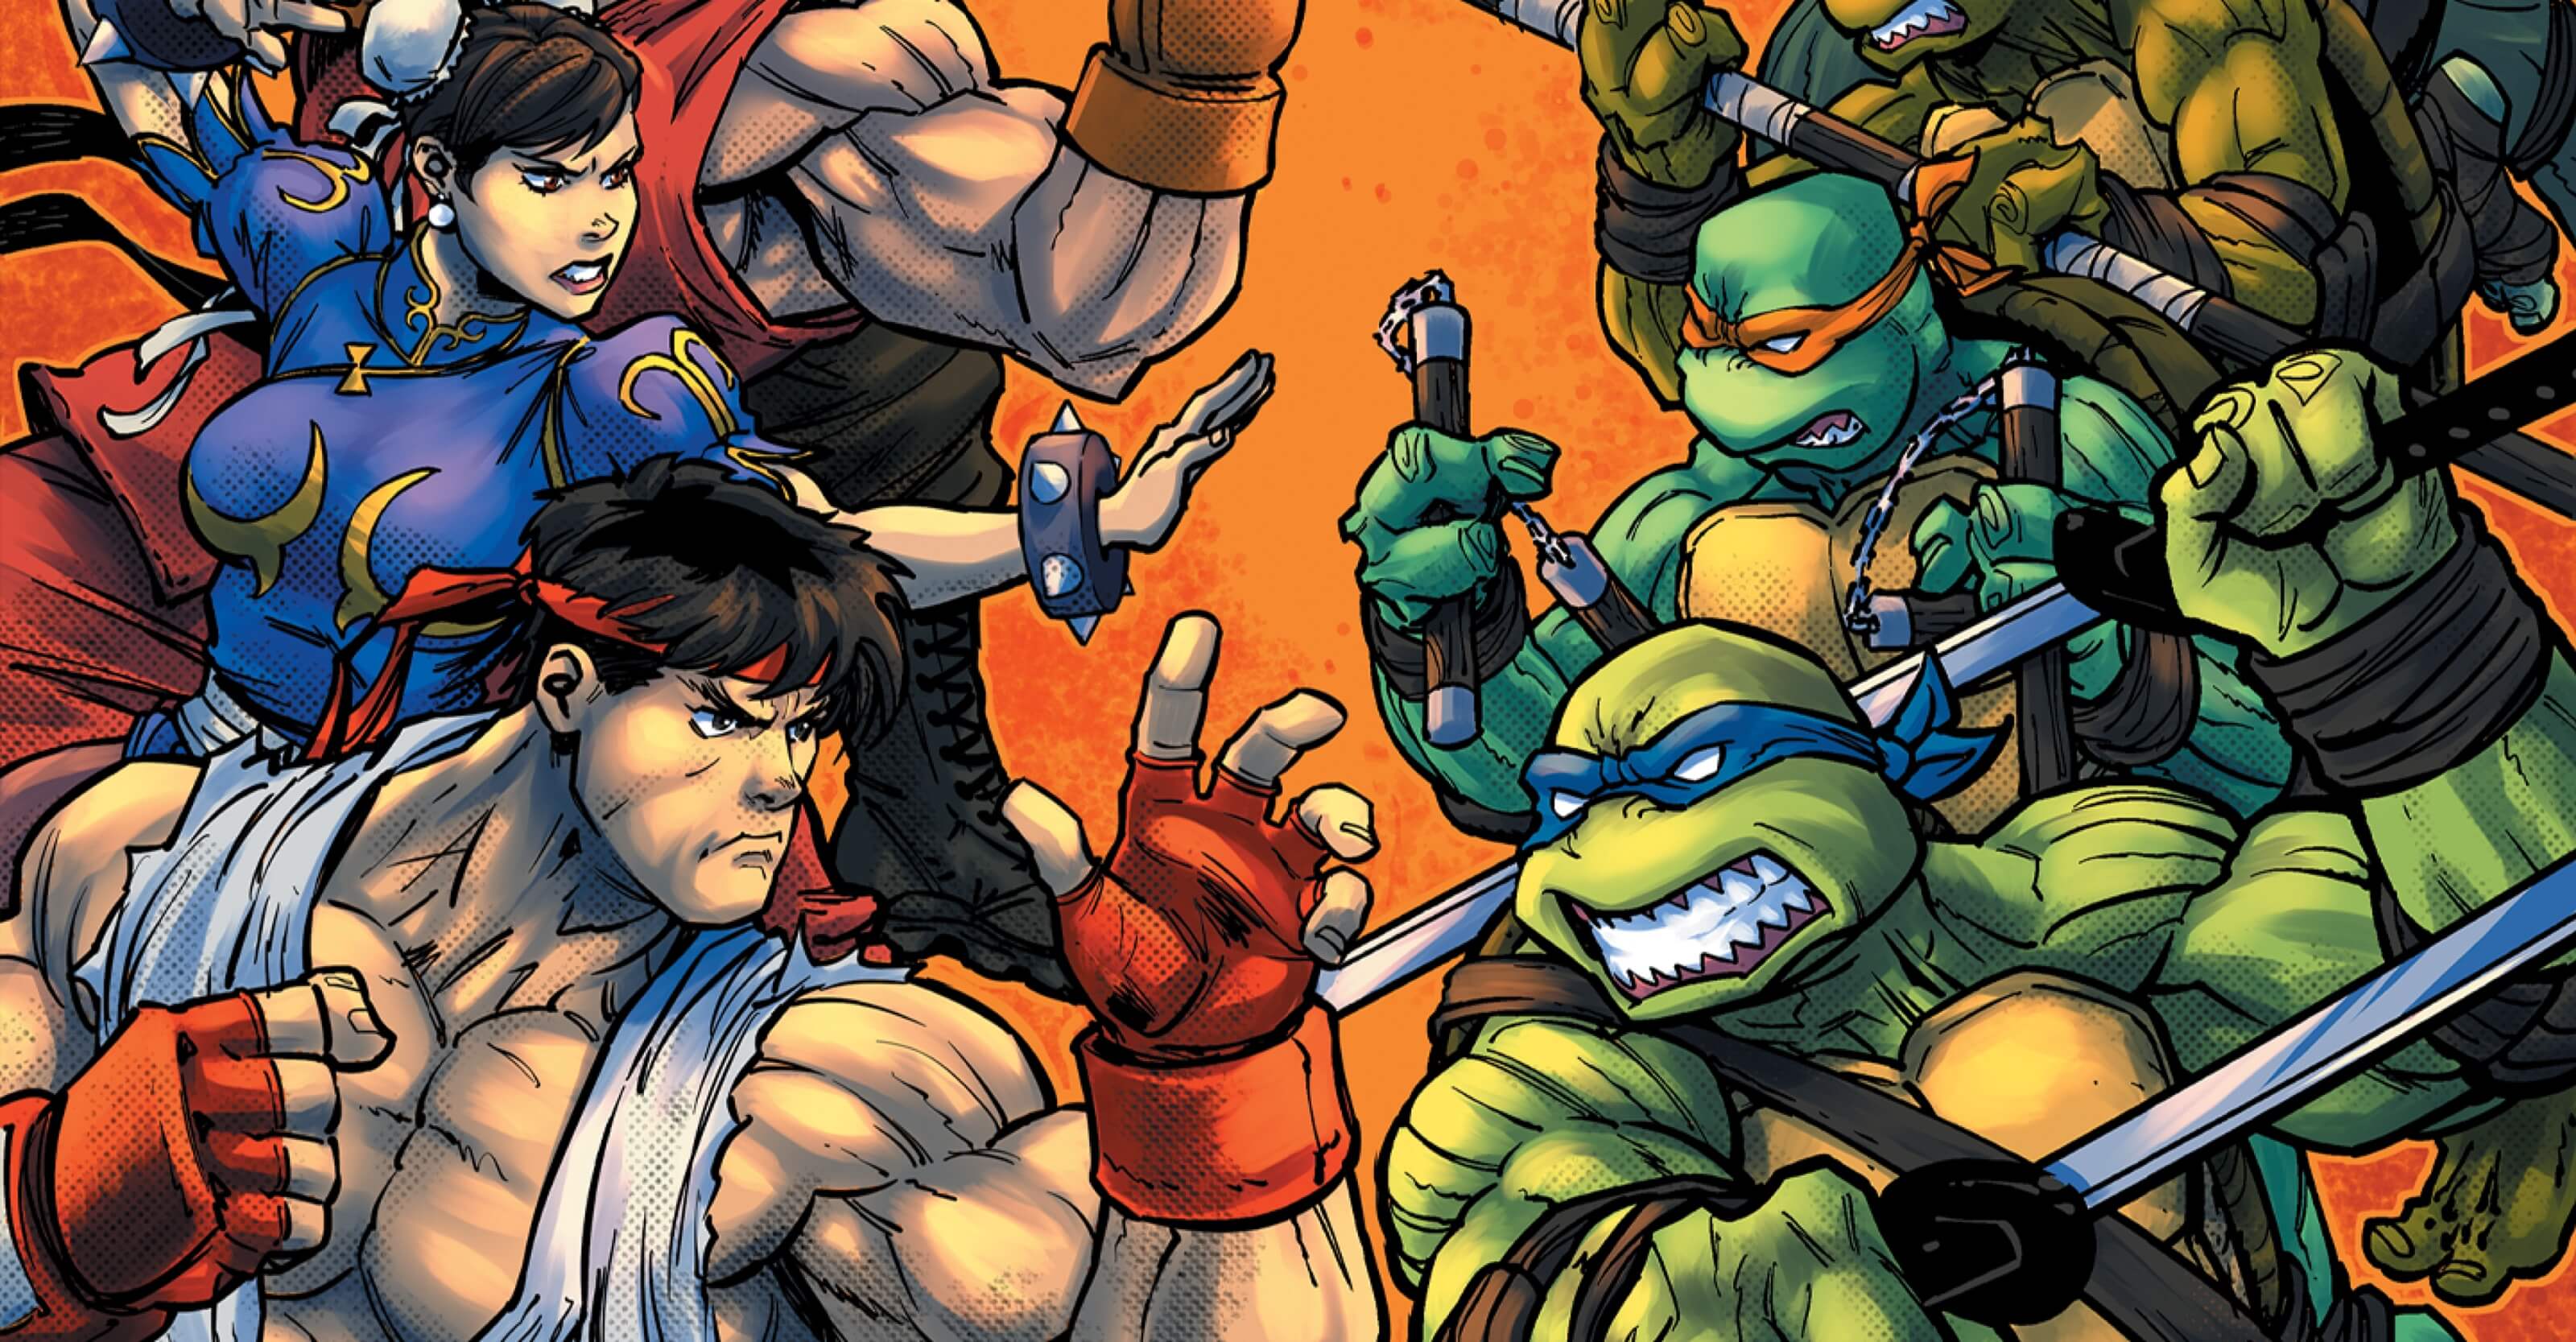 Two Iconic Crews Square Off for the Ultimate Bare-Knuckle Battle in Teenage Mutant Ninja Turtles Vs. Street Fighter